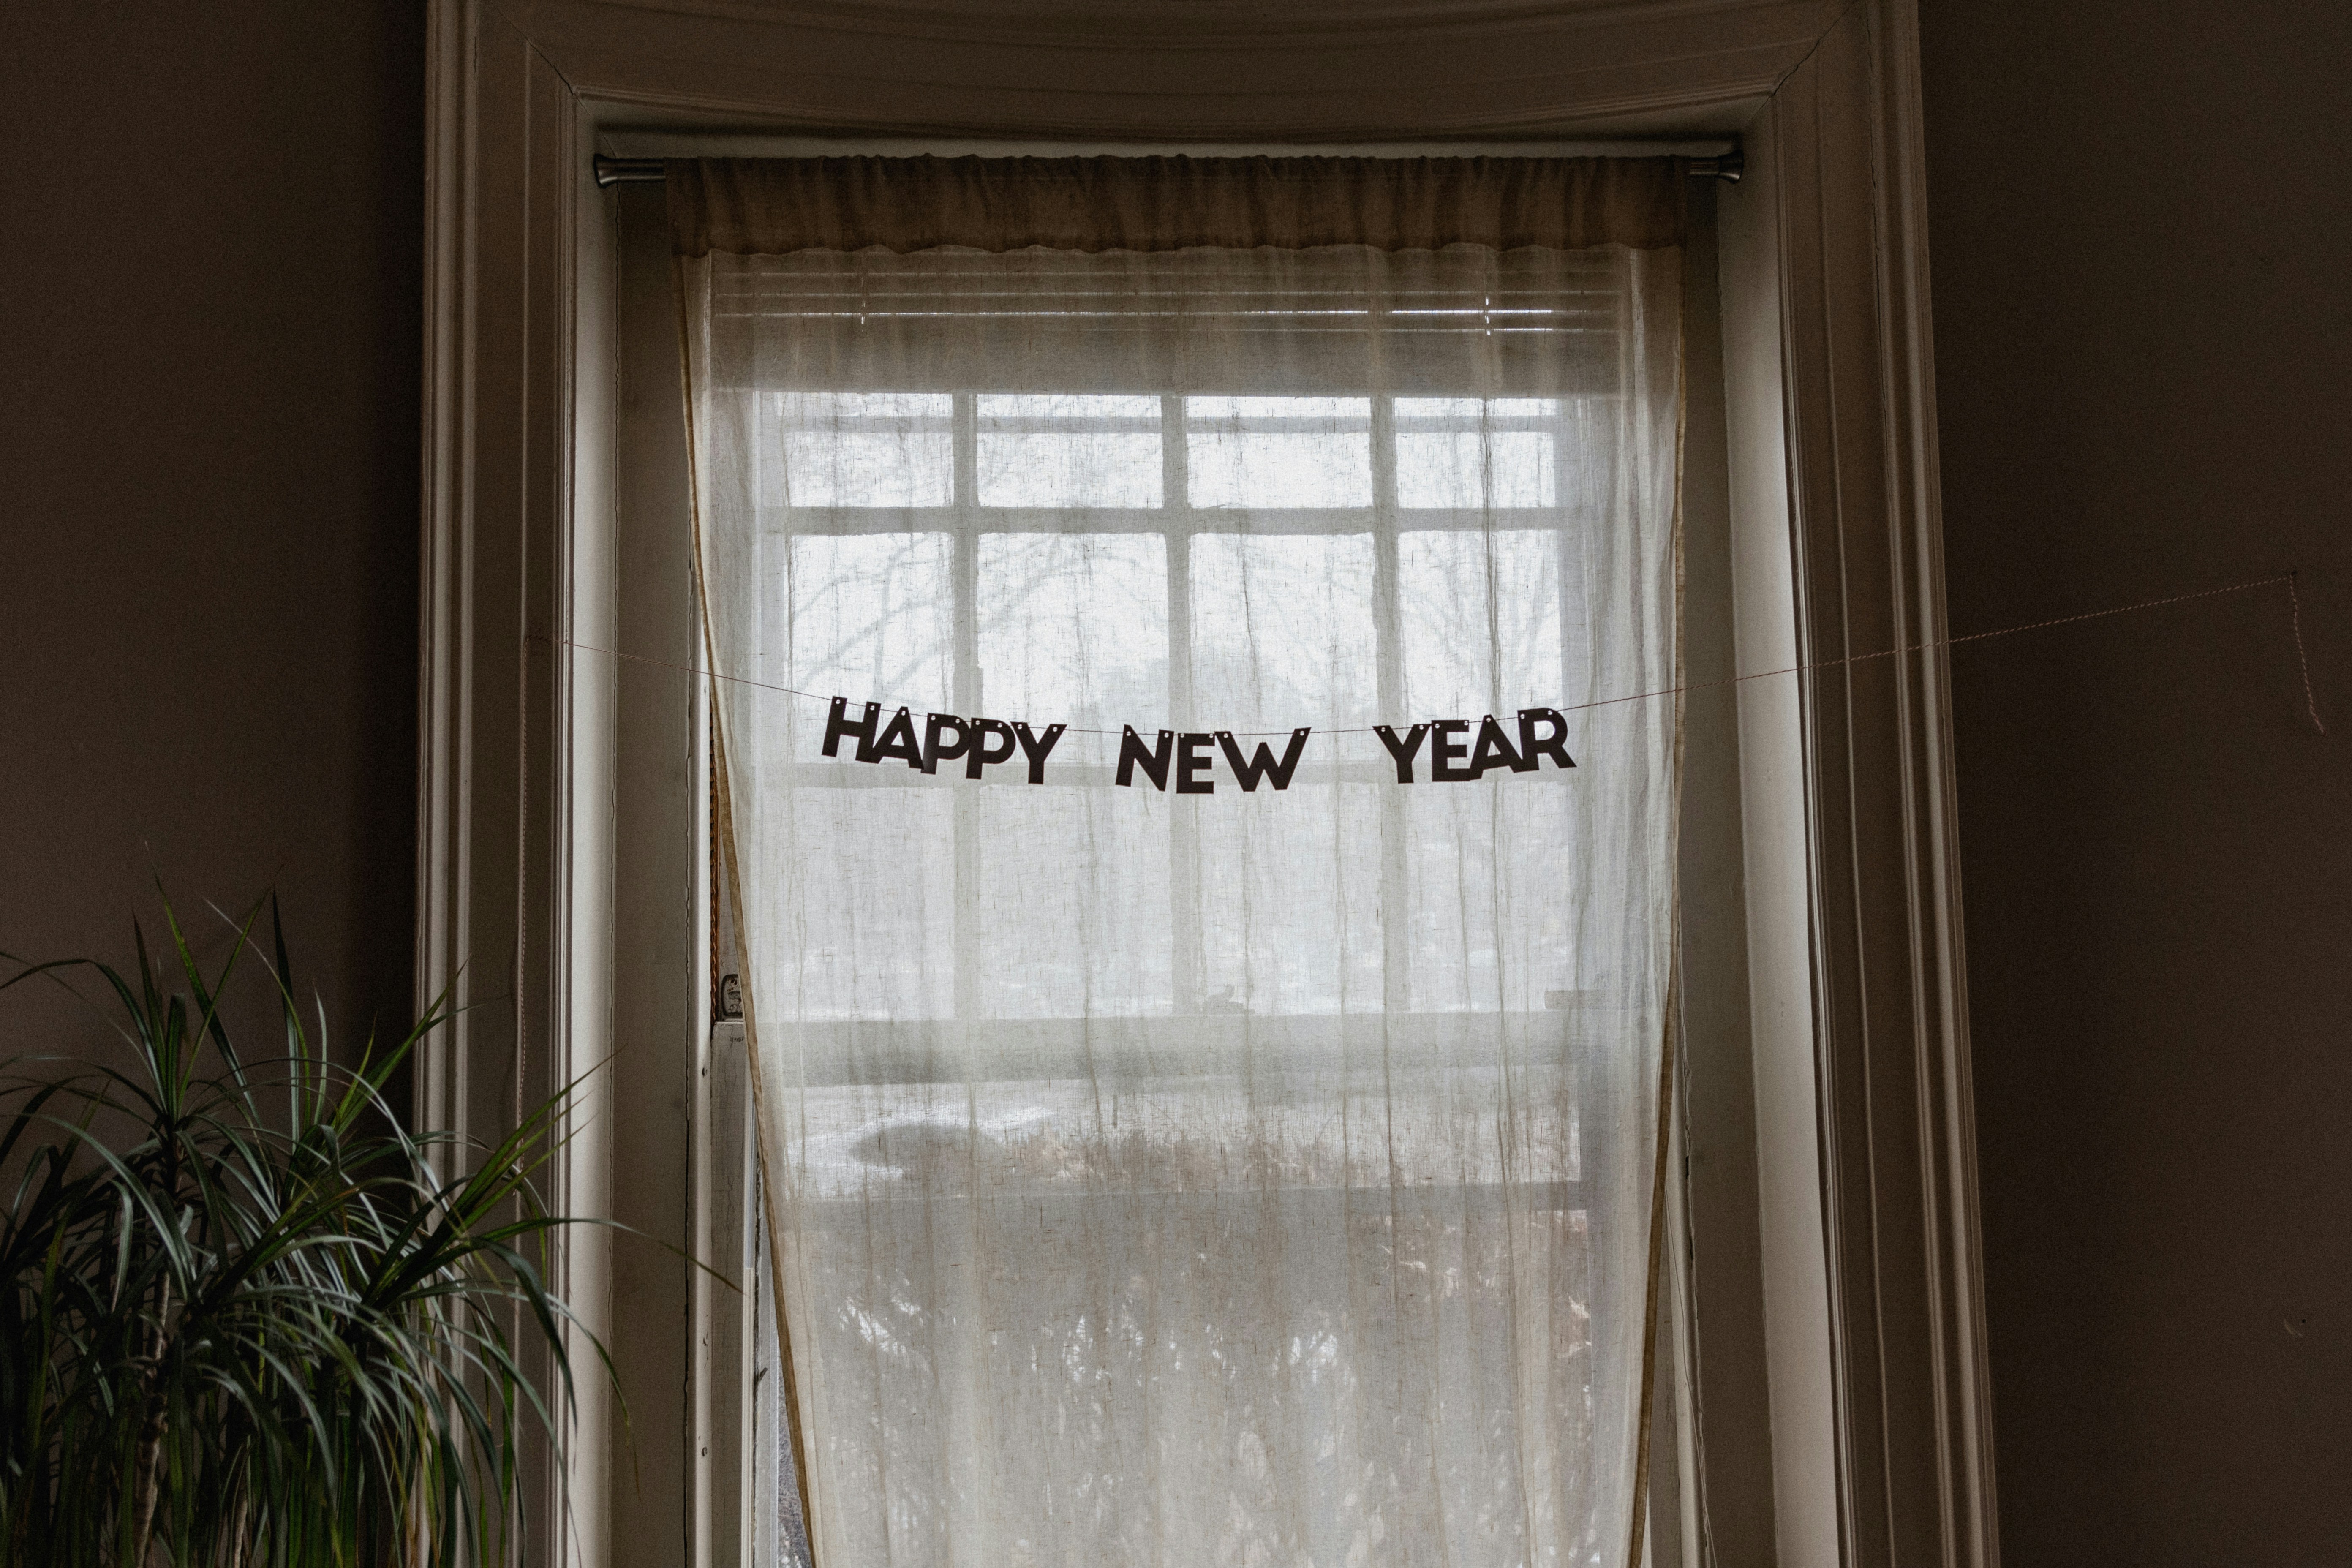 Happy New Year sign hanging in a curtained window